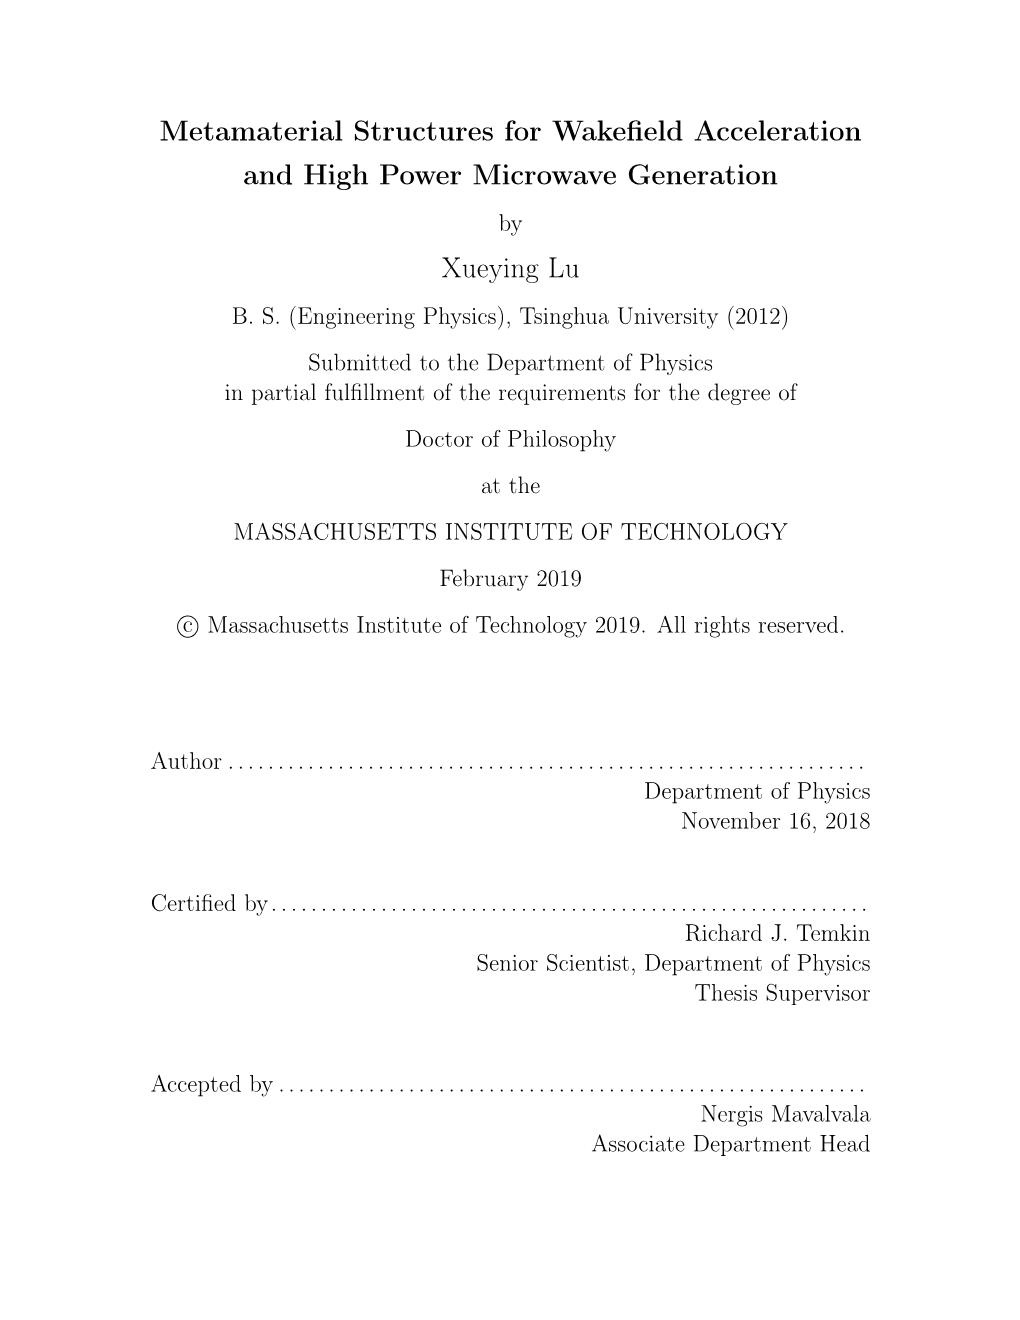 Metamaterial Structures for Wakefield Acceleration and High Power Microwave Generation Xueying Lu